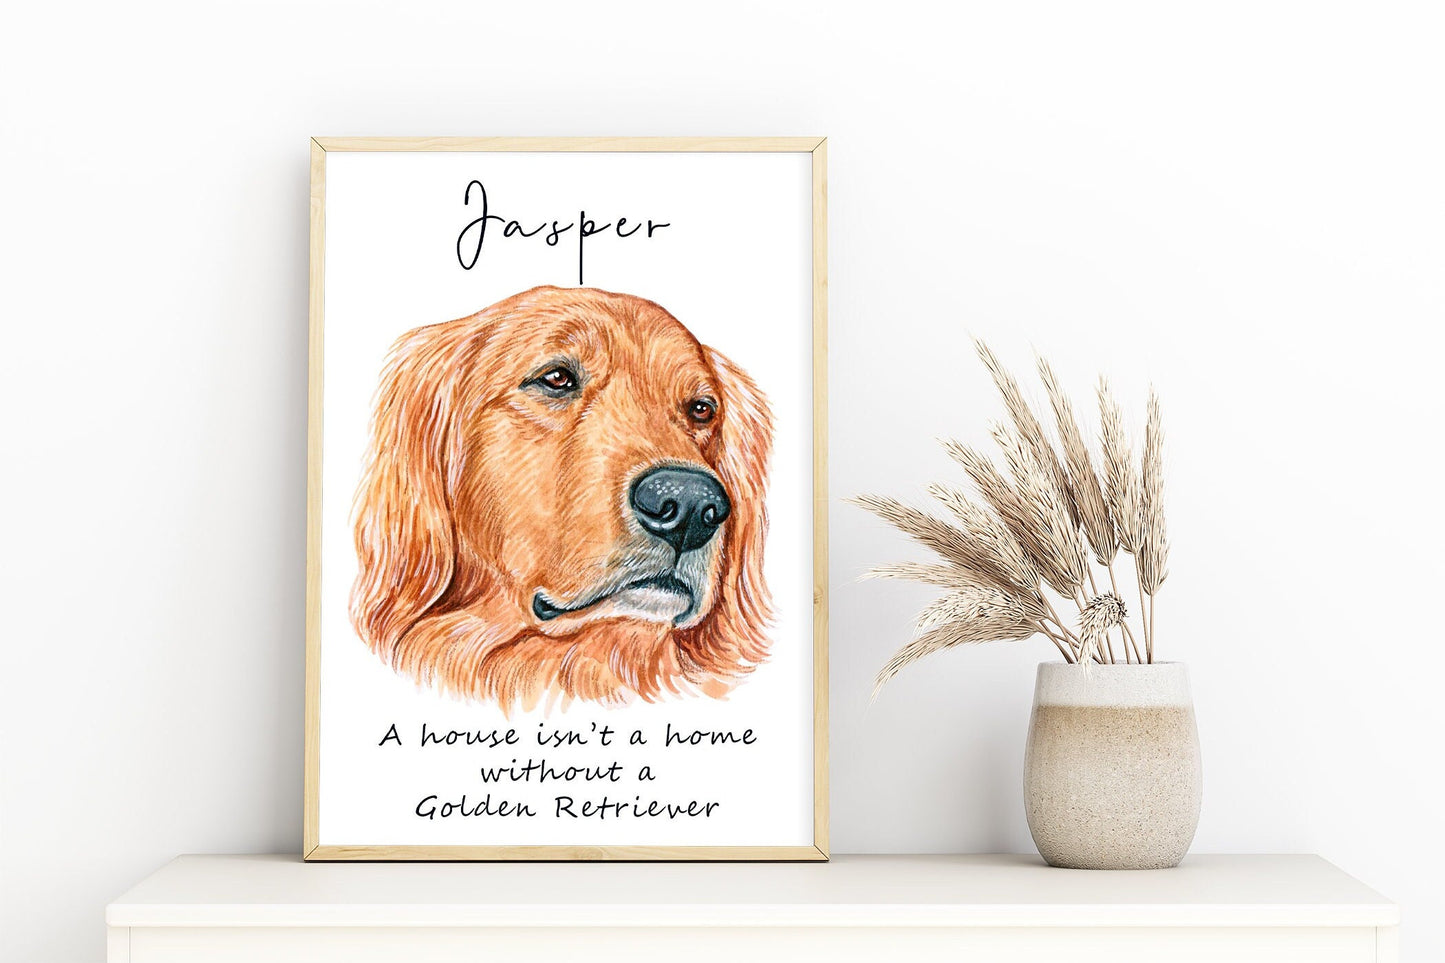 Golden retriever artwork - adorable dog portraits with custom funny or heart warming message | A4 | A5 | Greeting card